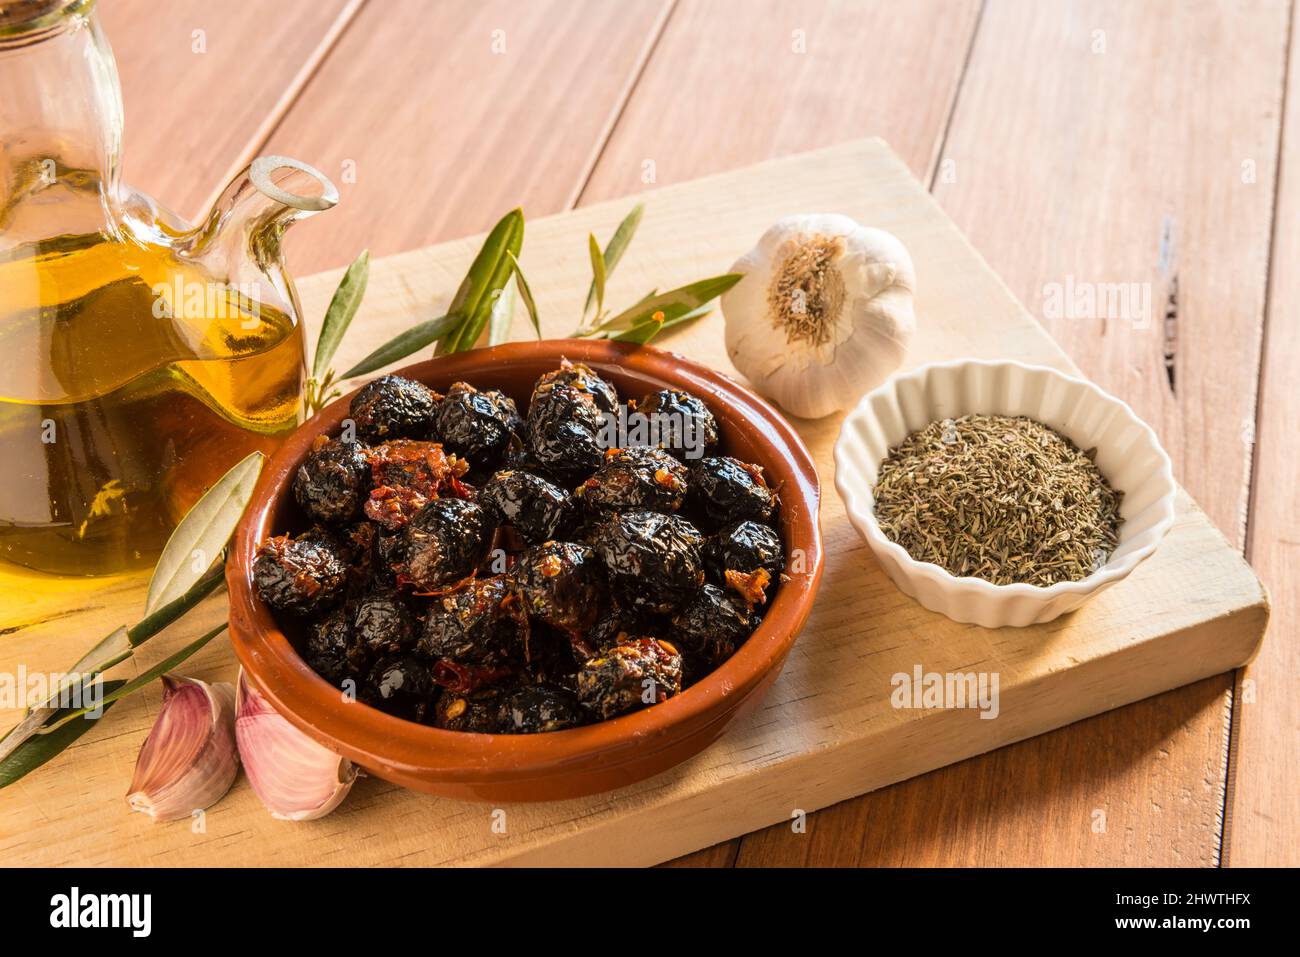 Still life with a bowl of olives, together with different seasonings used for their dressing, on a wooden board. Homemade preparation of olives, tradi Stock Photo